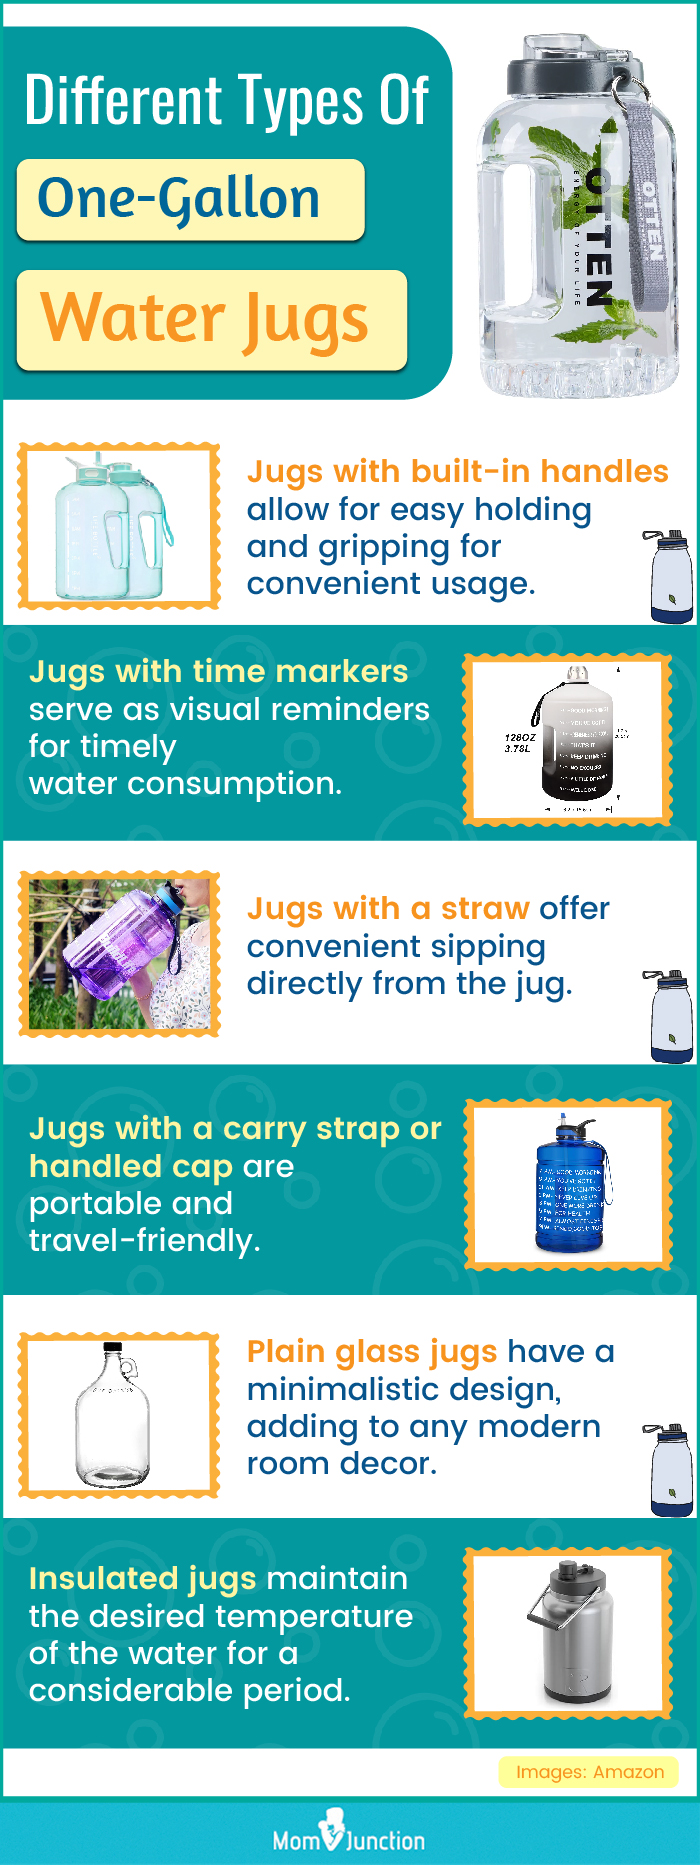 Different Types Of One Gallon Water Jugs (infographic)